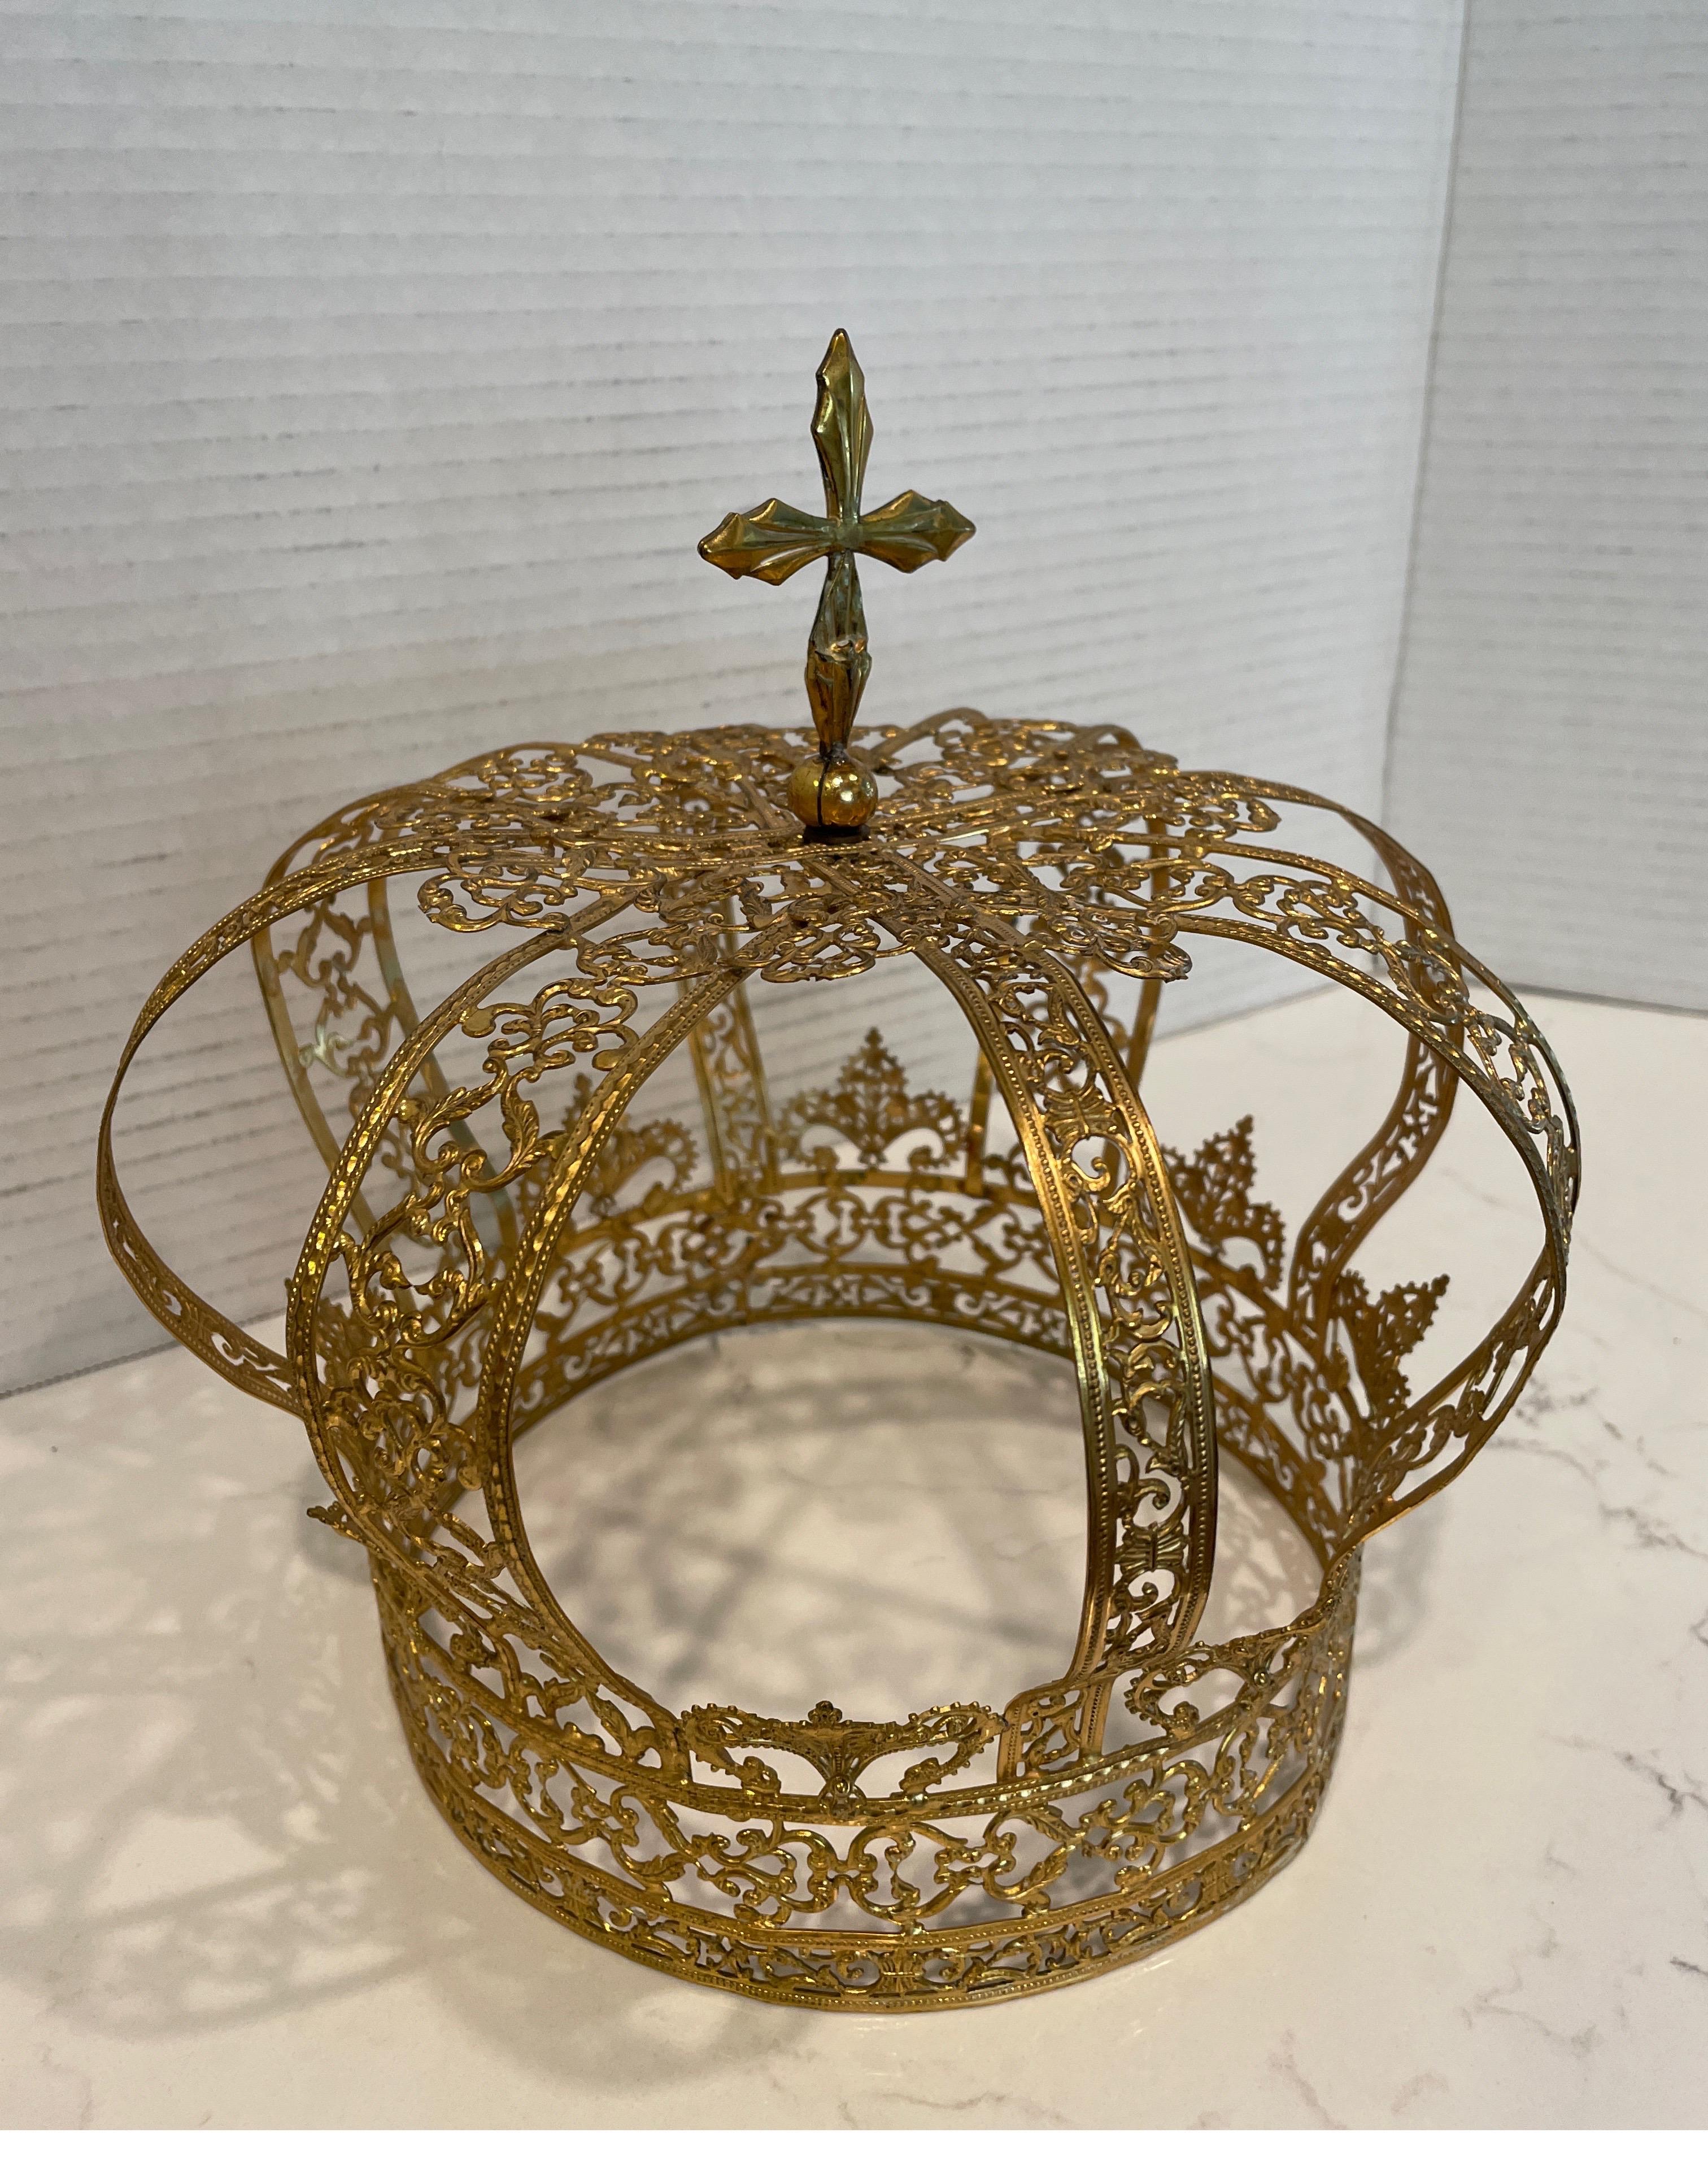 A gold tone religious Santos crown with stones embedded.